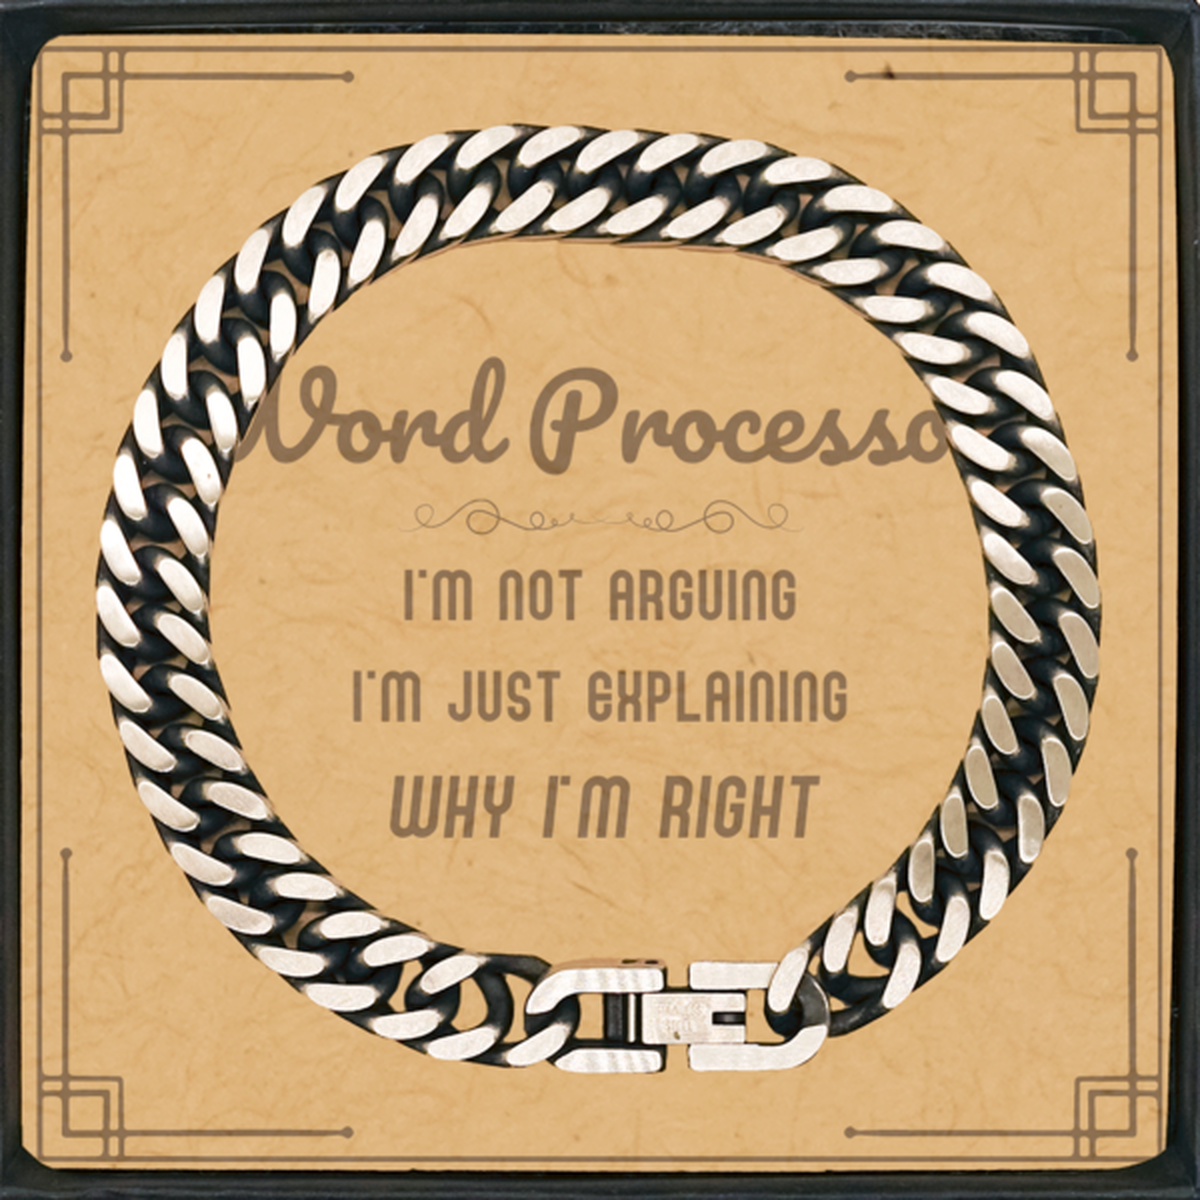 Word Processor I'm not Arguing. I'm Just Explaining Why I'm RIGHT Cuban Link Chain Bracelet, Funny Saying Quote Word Processor Gifts For Word Processor Message Card Graduation Birthday Christmas Gifts for Men Women Coworker